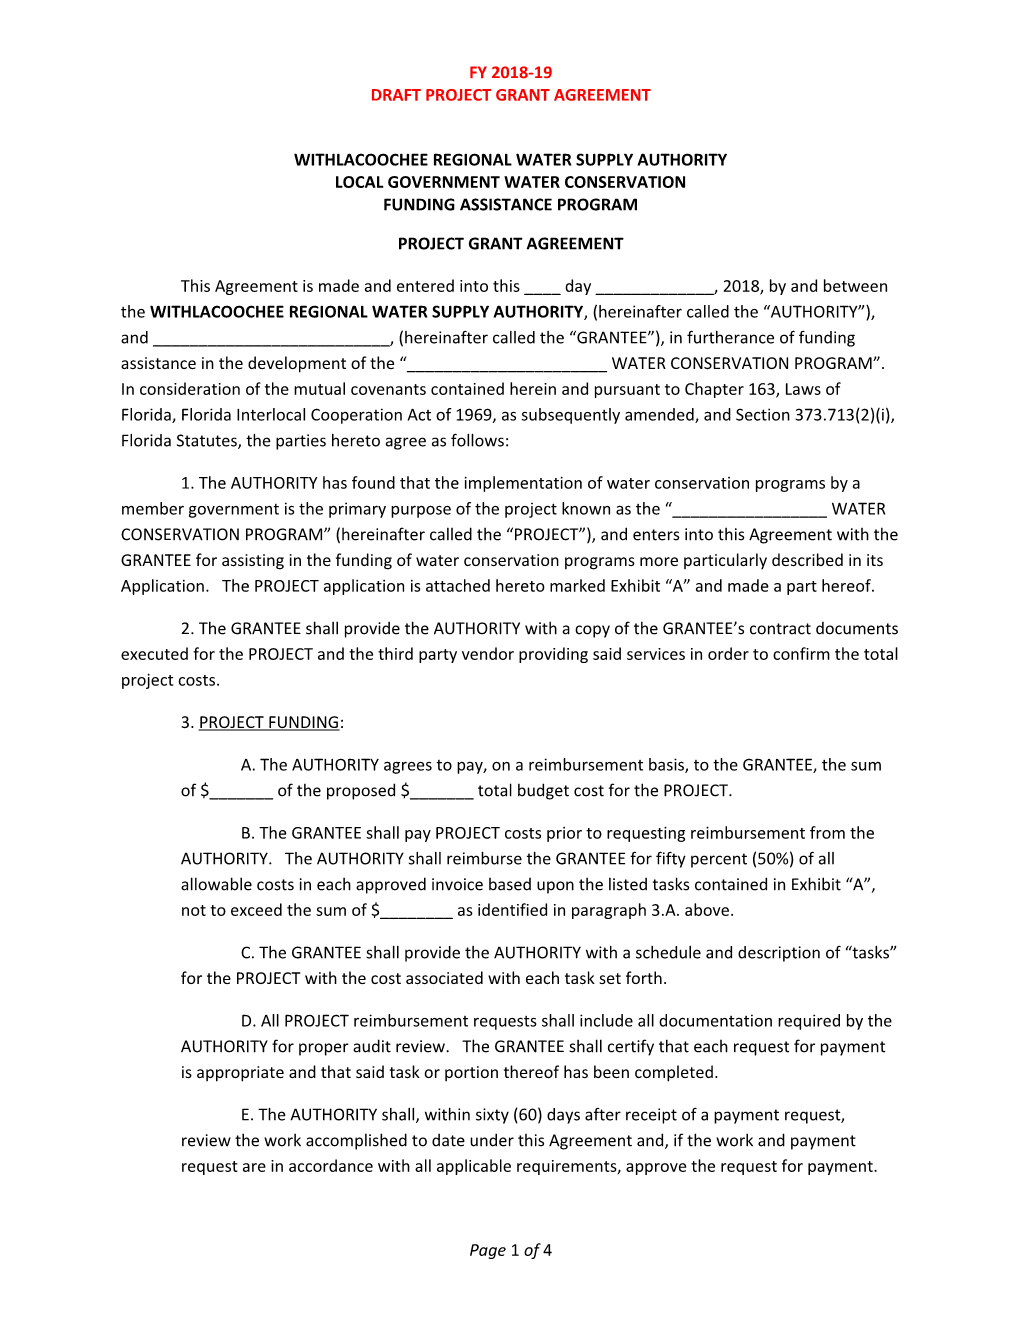 Draft Project Grant Agreement